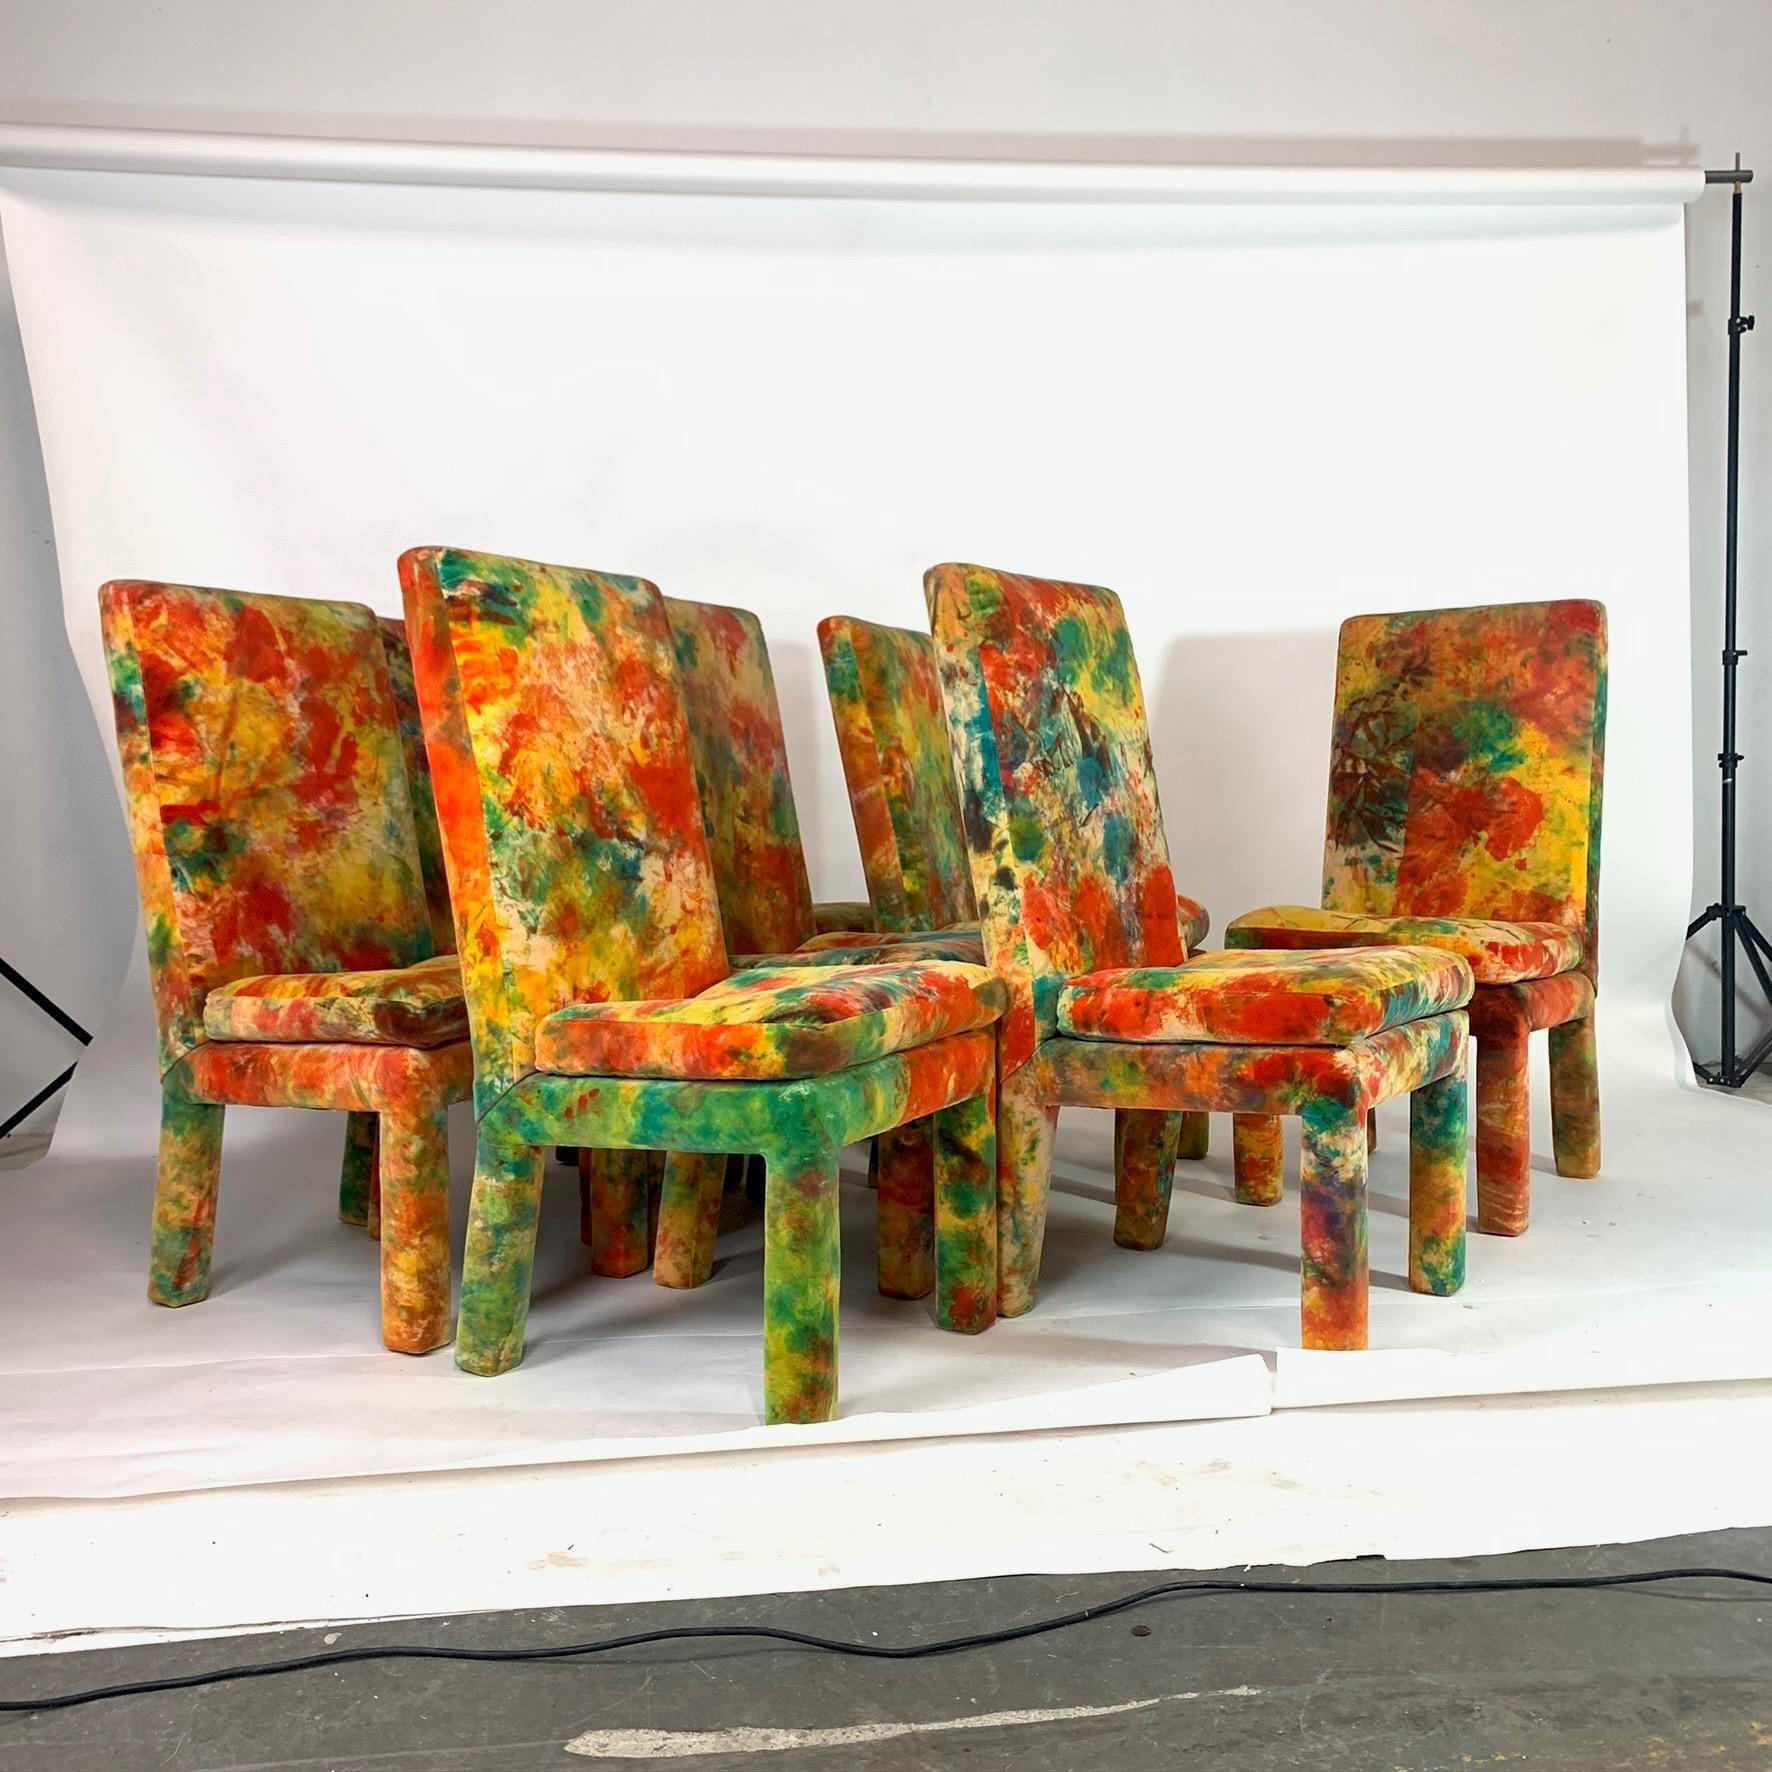 Amazing one of a kind set of Milo Baughman for Thayer Coggin chairs from the 1970s. Upholstered in a very rare Jack Leonor Larsen tie die velvet upholstery. These chairs are stunning in person. A real showstopper! The seats are very soft with high